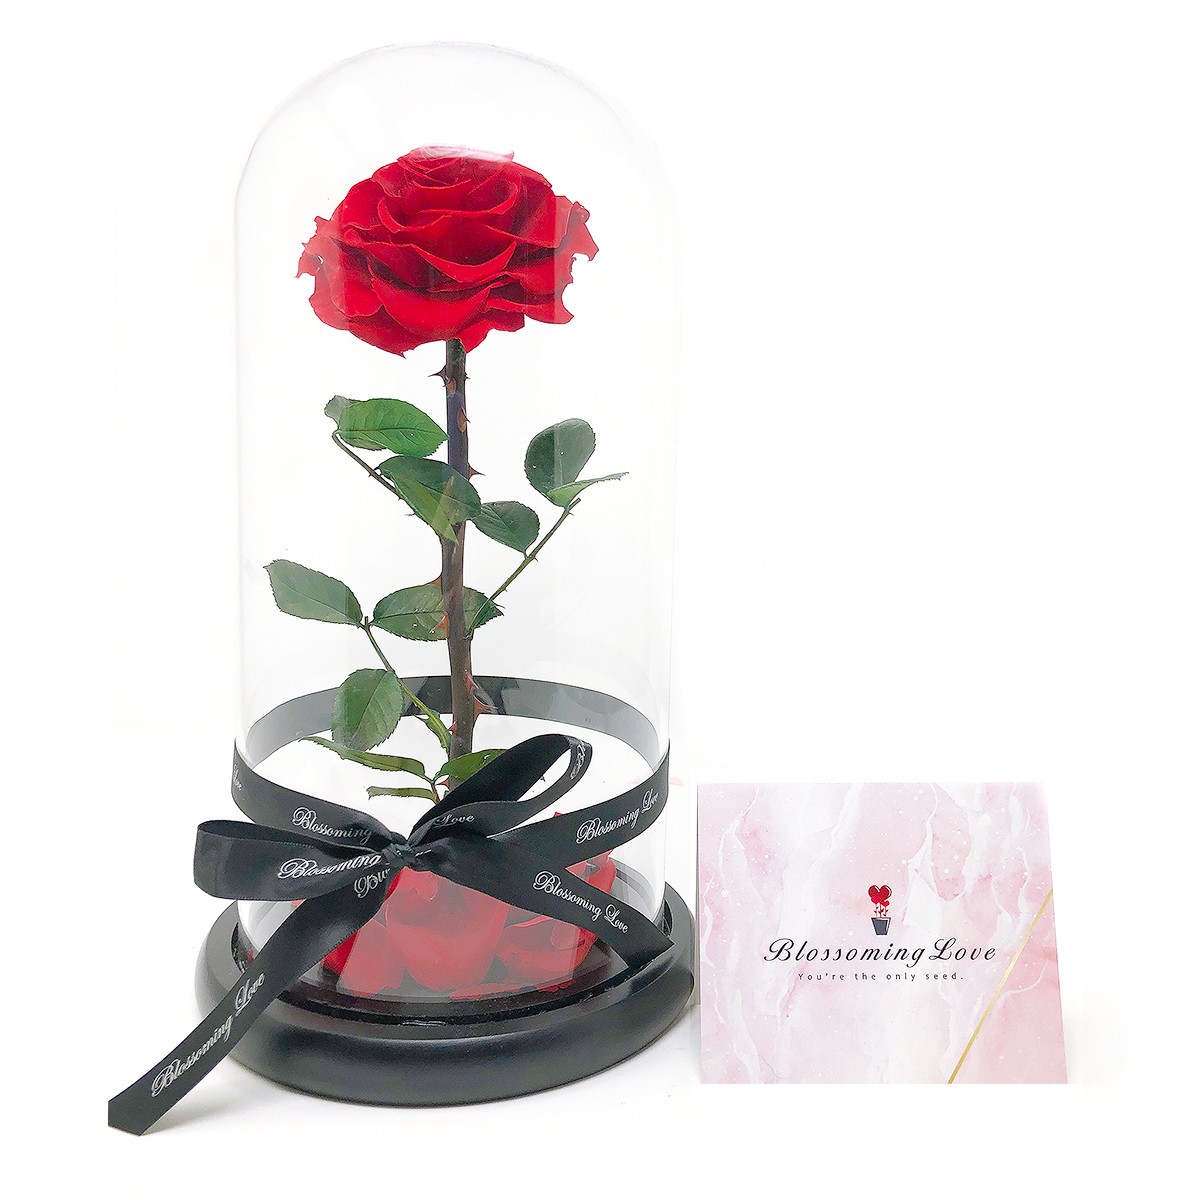 Blossoming Love Beauty and Beast Single Preserved Rose - Red